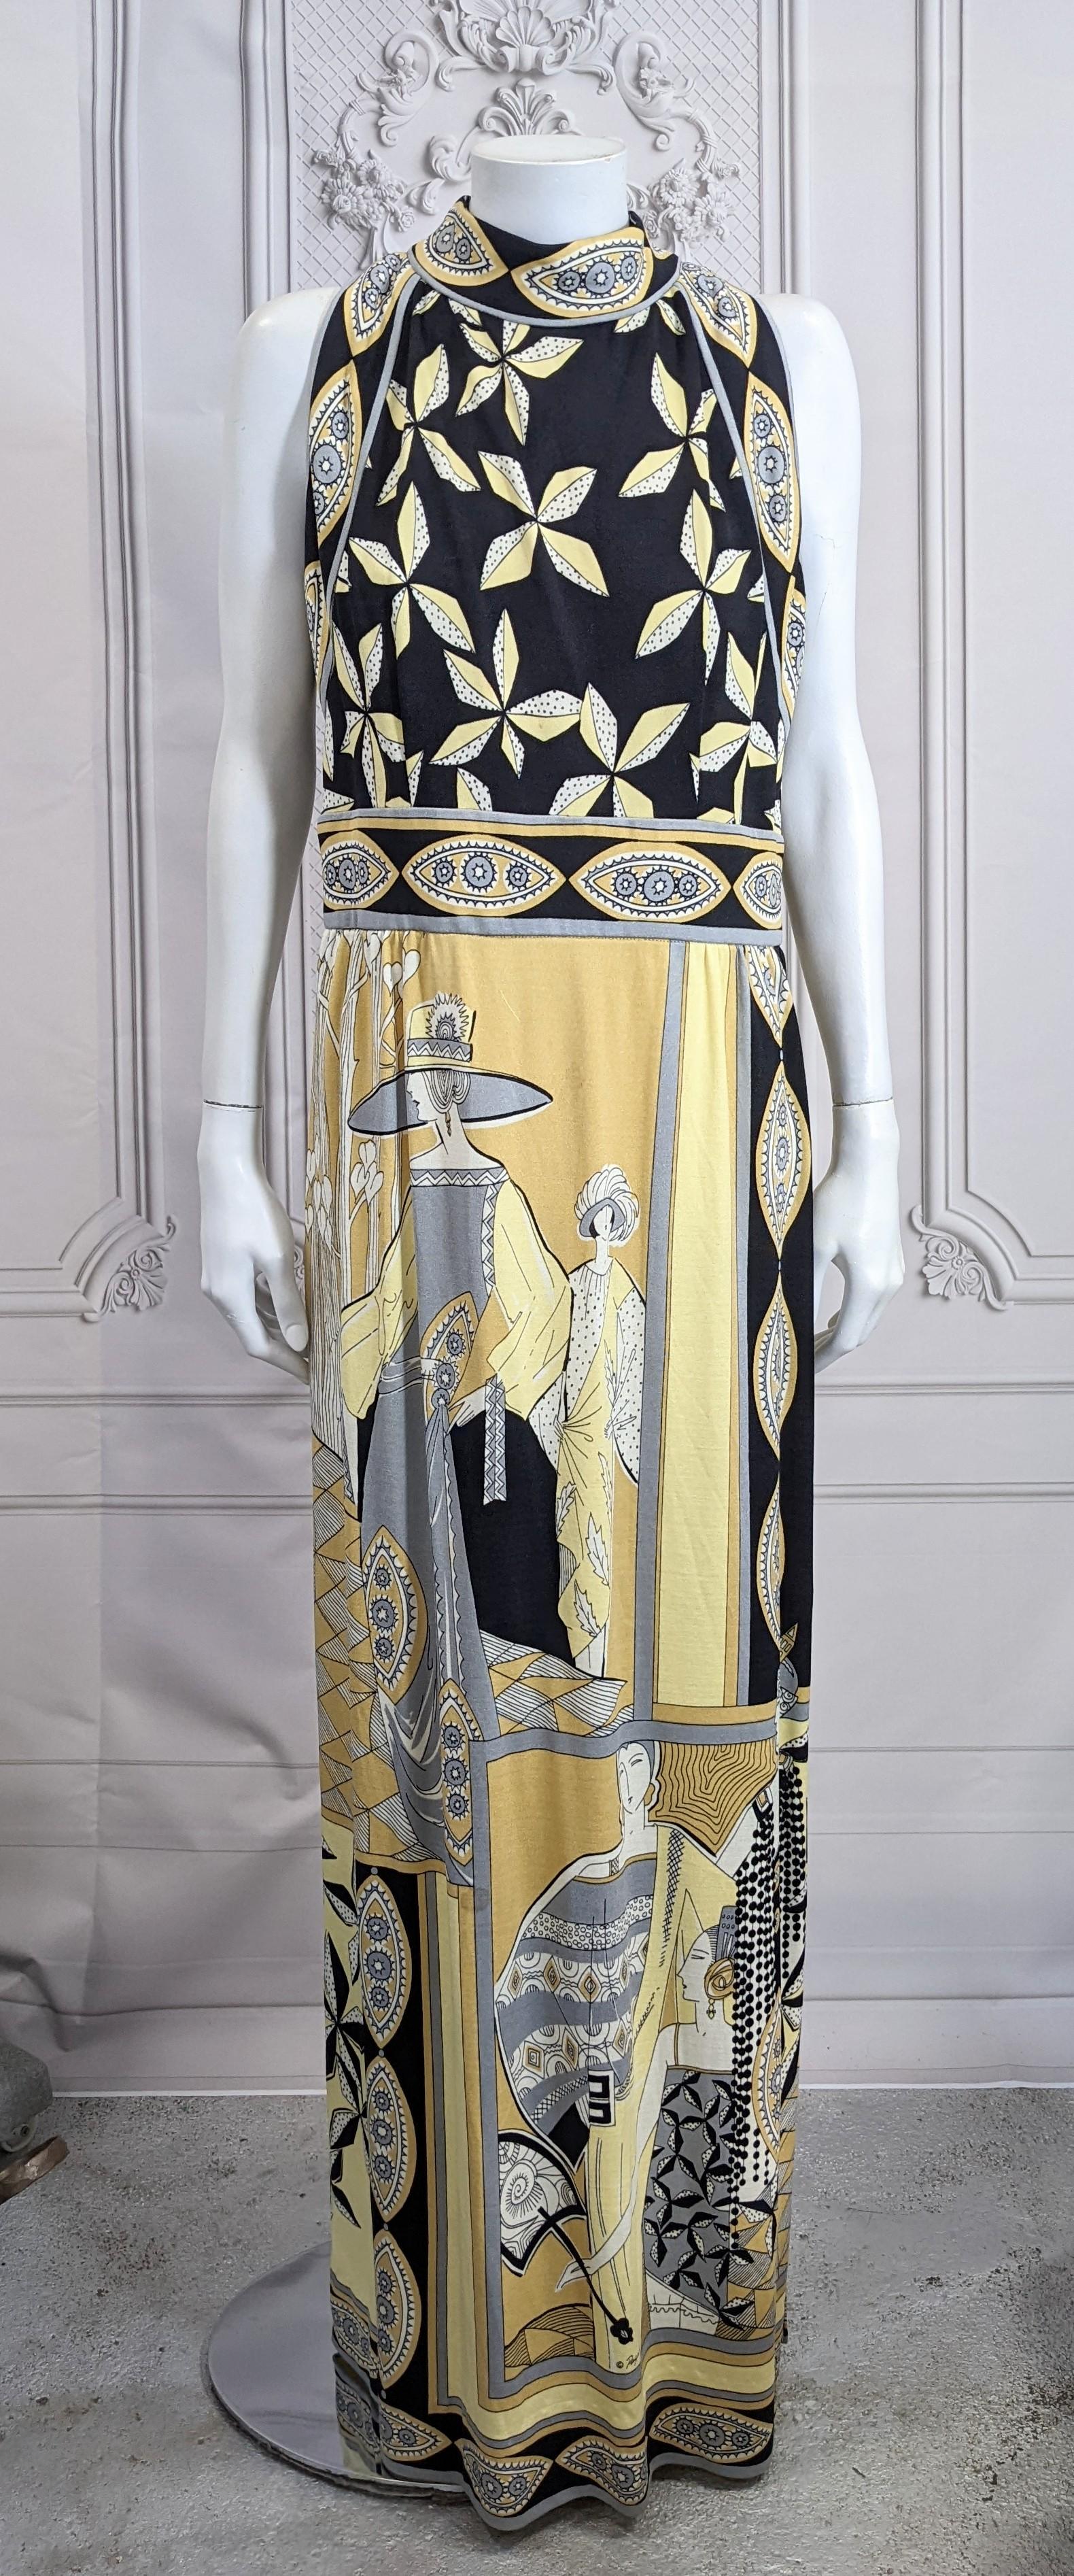 Paganne by Gene Berk Gown from the 1970's in synthetic knit with a placed print of French Art Deco Fashion Designs on skirt. High neck, cut away armholes with black, white, grey and tonal yellow print with left side slit. 
Vintage size 14, Modern